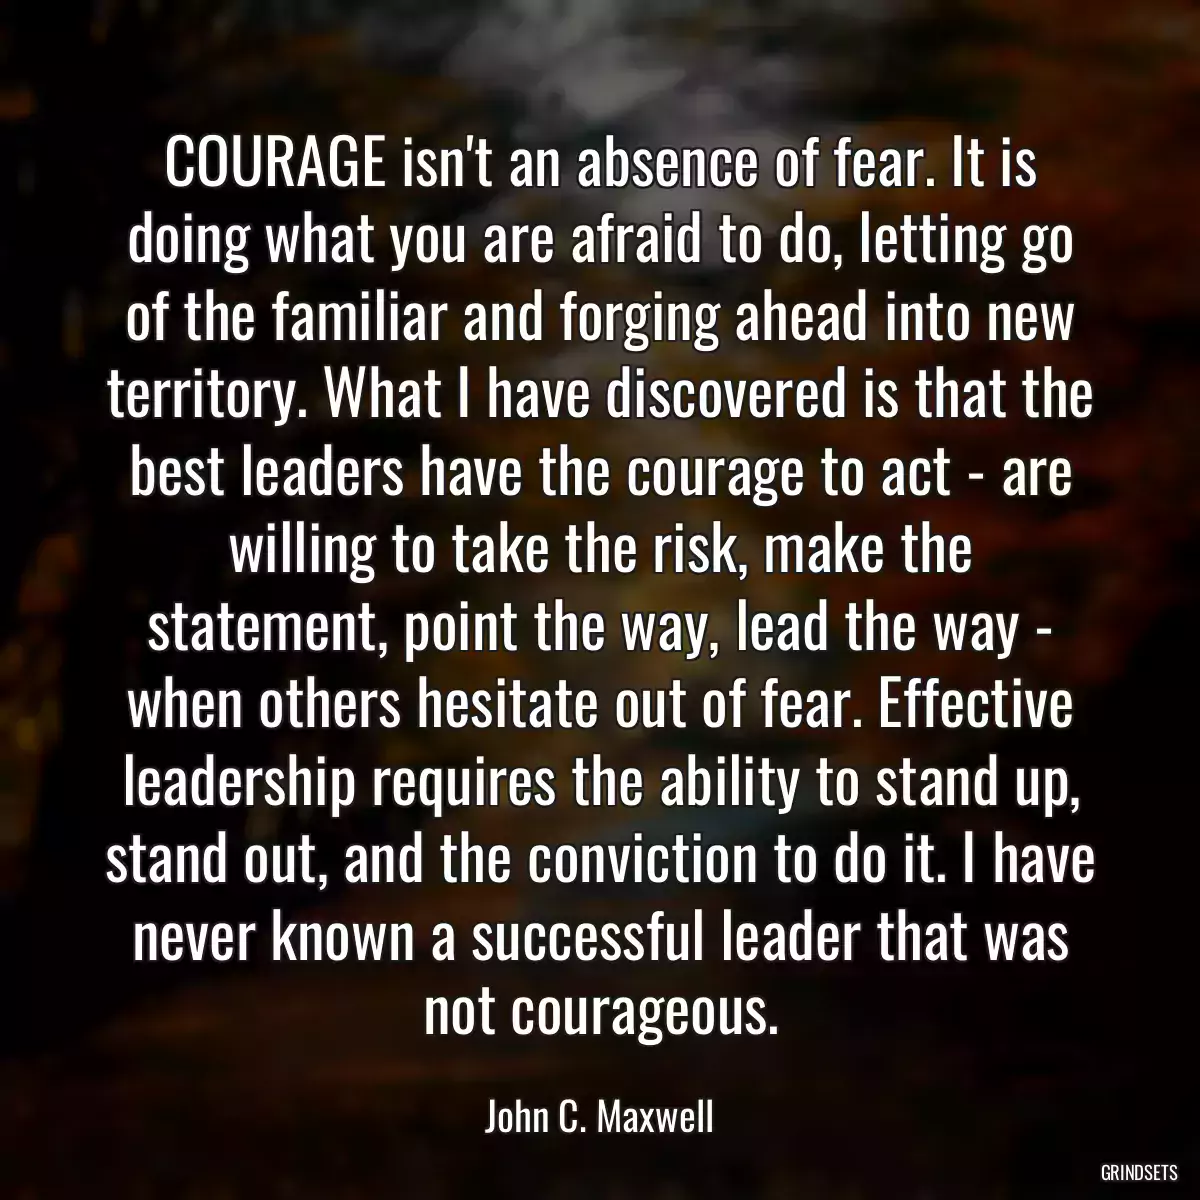 COURAGE isn\'t an absence of fear. It is doing what you are afraid to do, letting go of the familiar and forging ahead into new territory. What I have discovered is that the best leaders have the courage to act - are willing to take the risk, make the statement, point the way, lead the way - when others hesitate out of fear. Effective leadership requires the ability to stand up, stand out, and the conviction to do it. I have never known a successful leader that was not courageous.